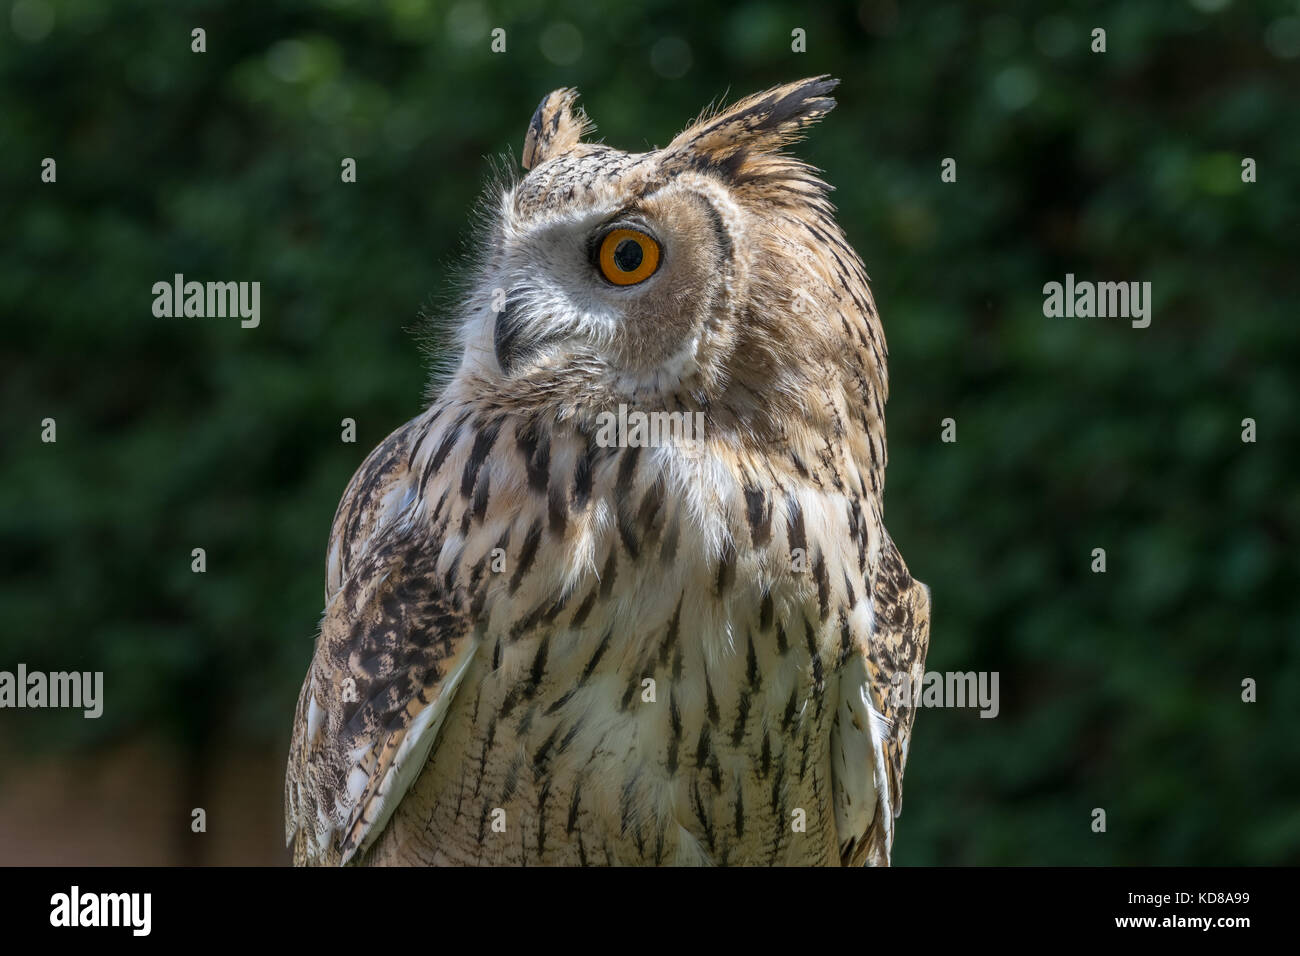 Gufo reale rapace close-up Foto Stock